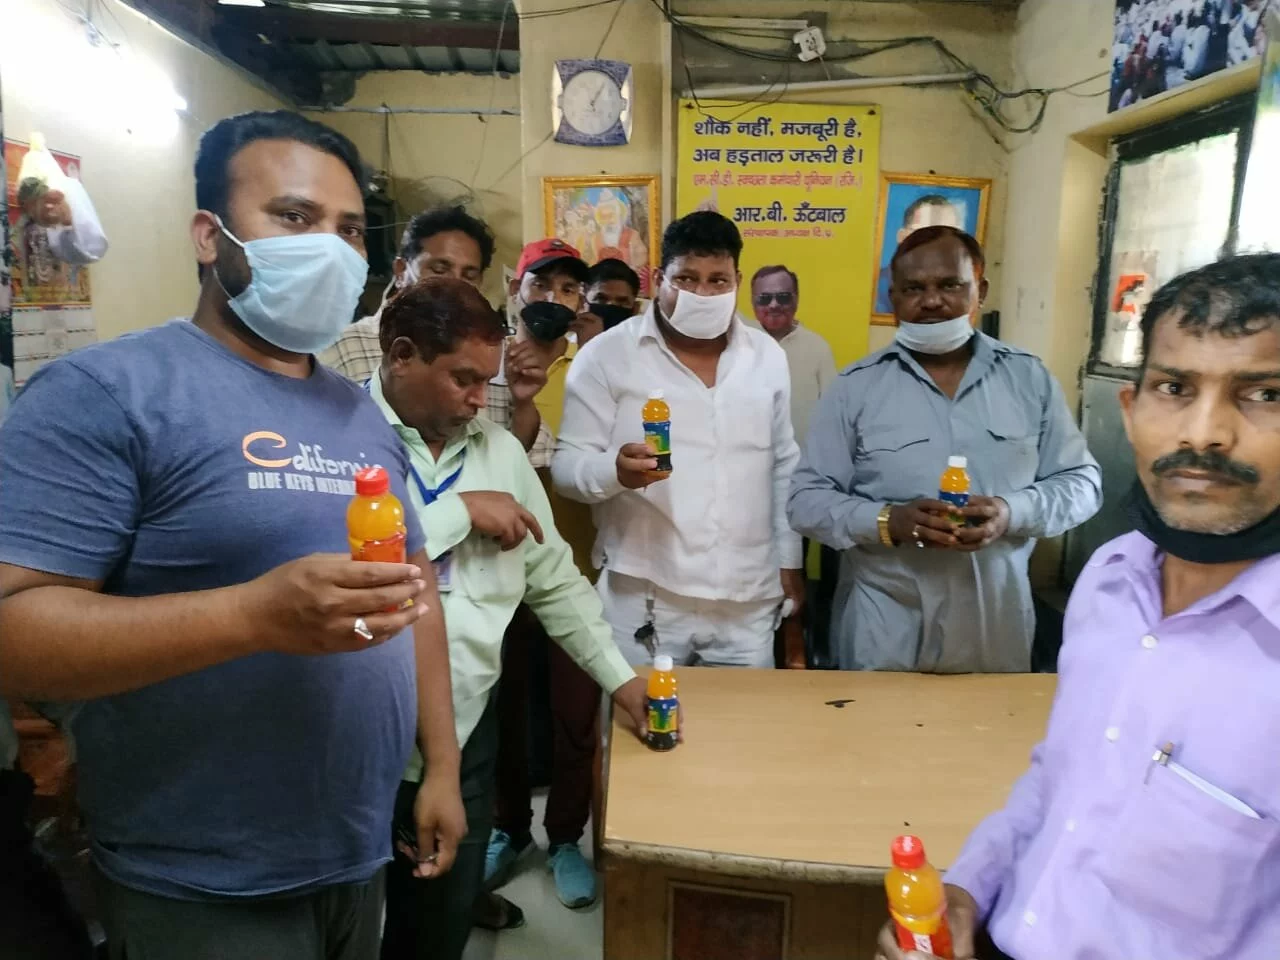 Cold drinks of expiry date are being given to cleaning workers at ADMC in East Delhi timefornews.in